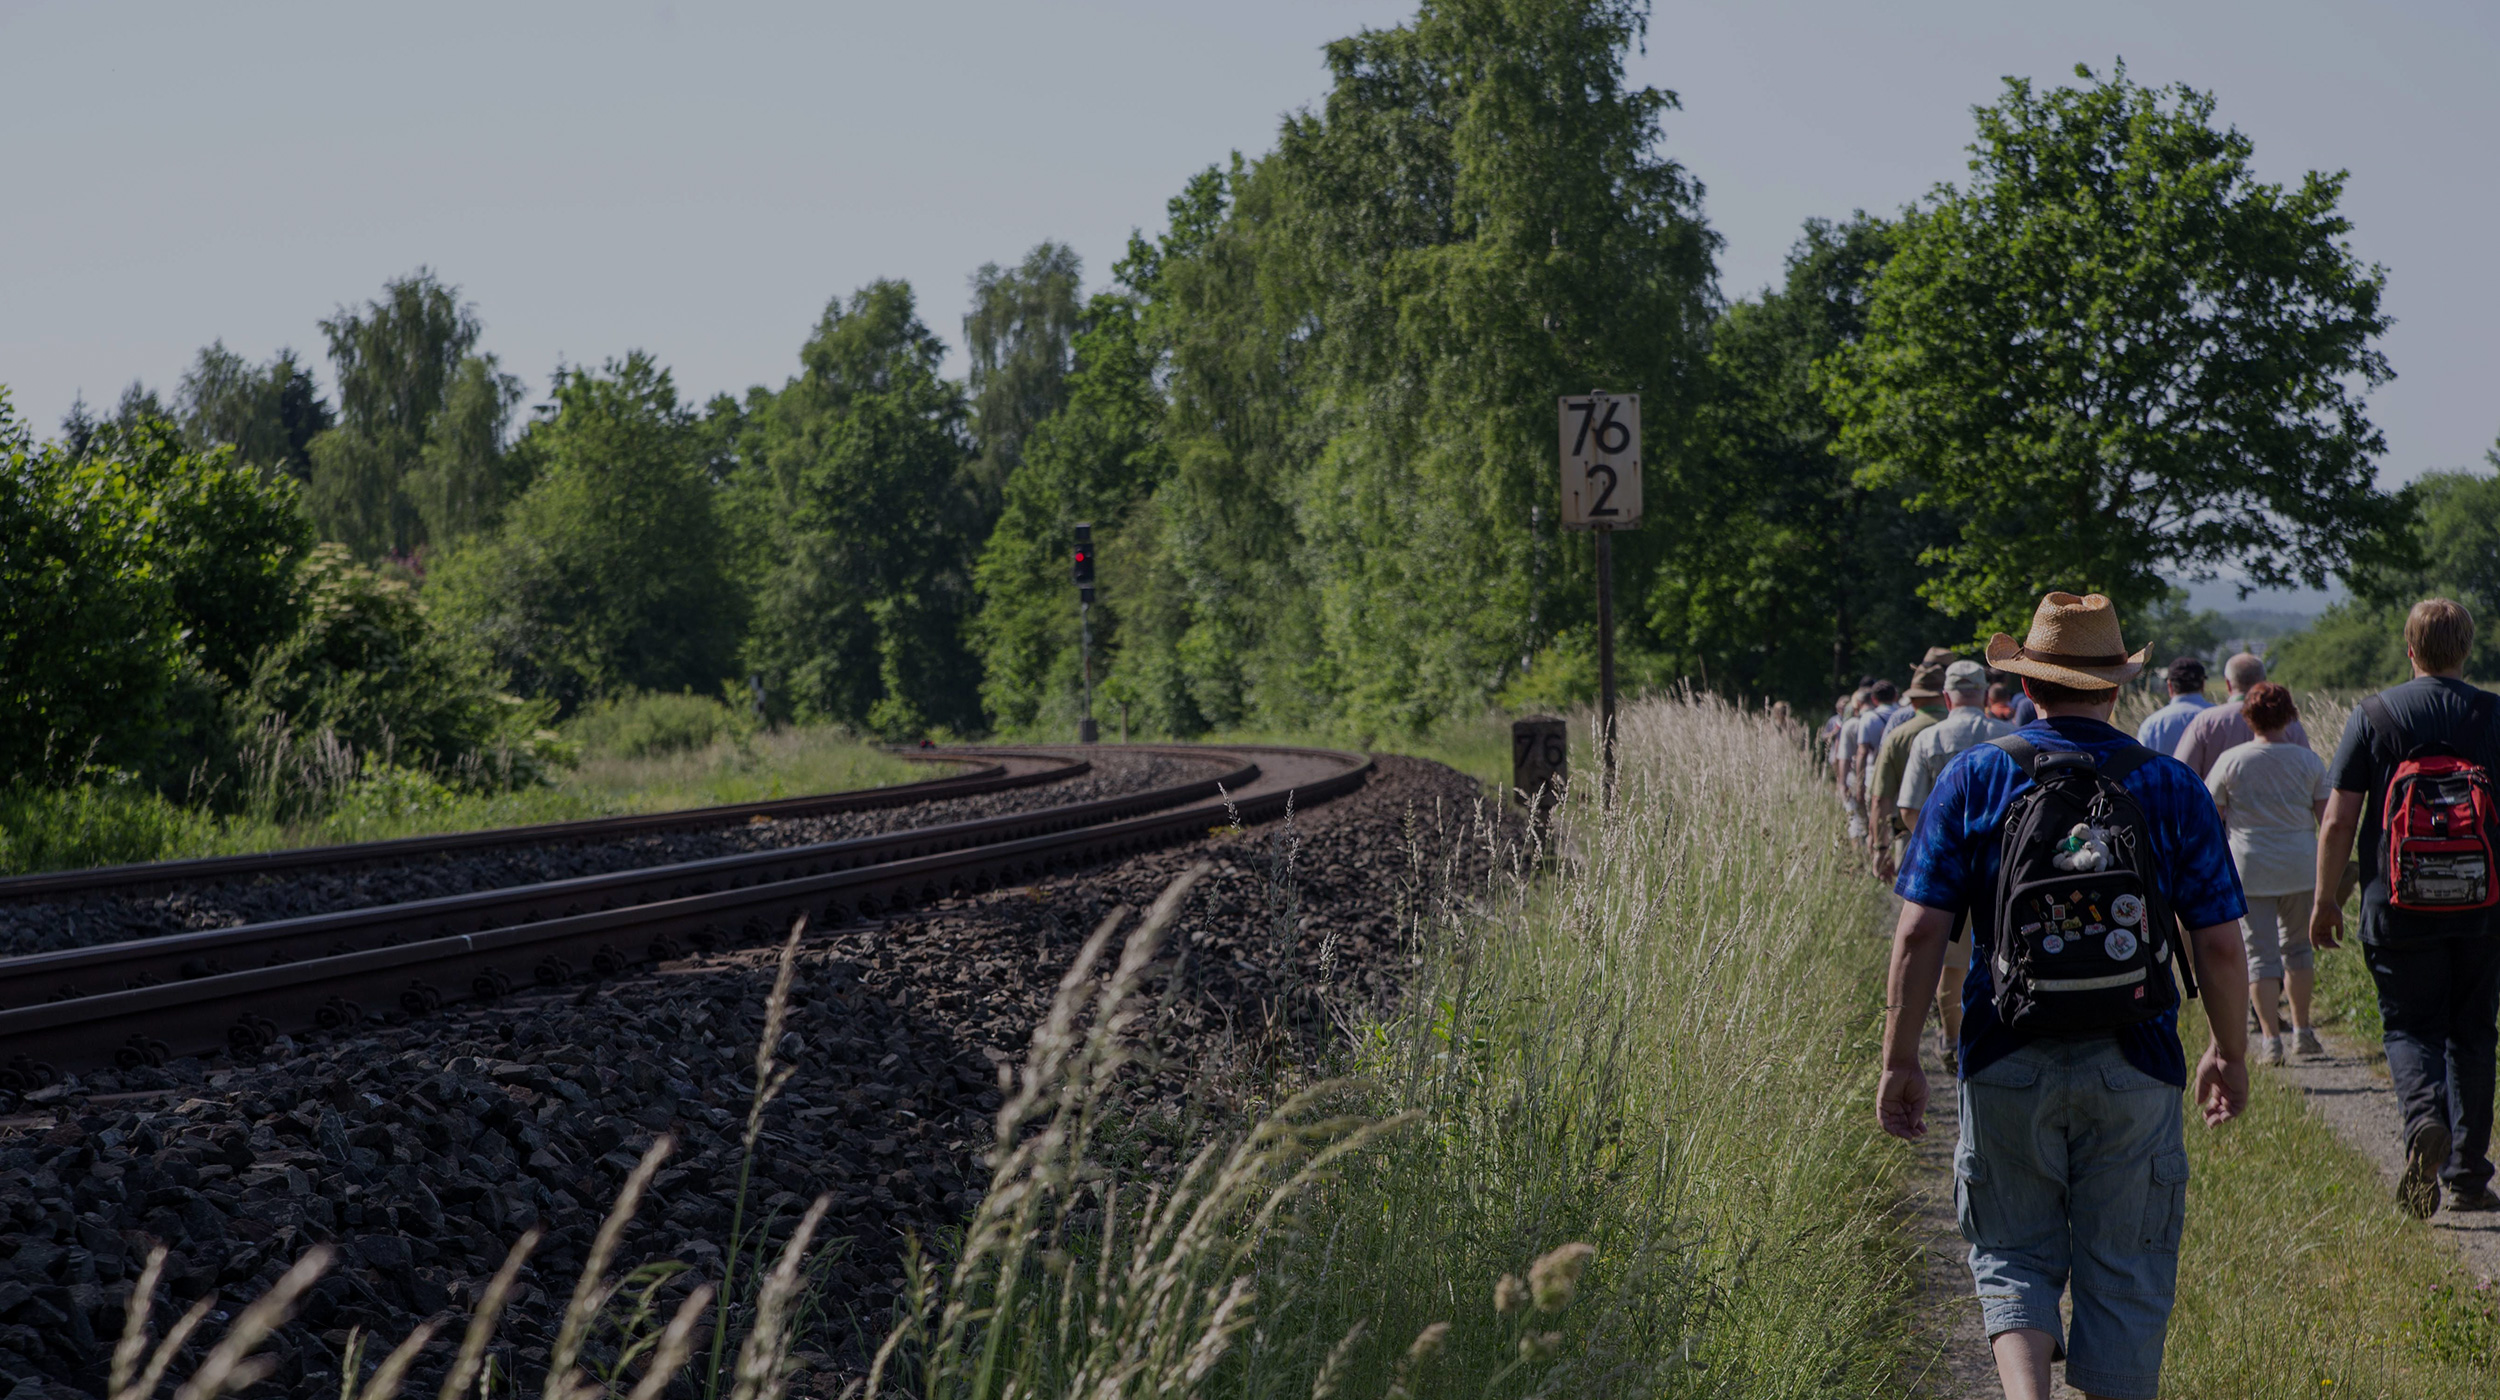 A group of railfans travelling along the Schiefe Ebene on a sunny day